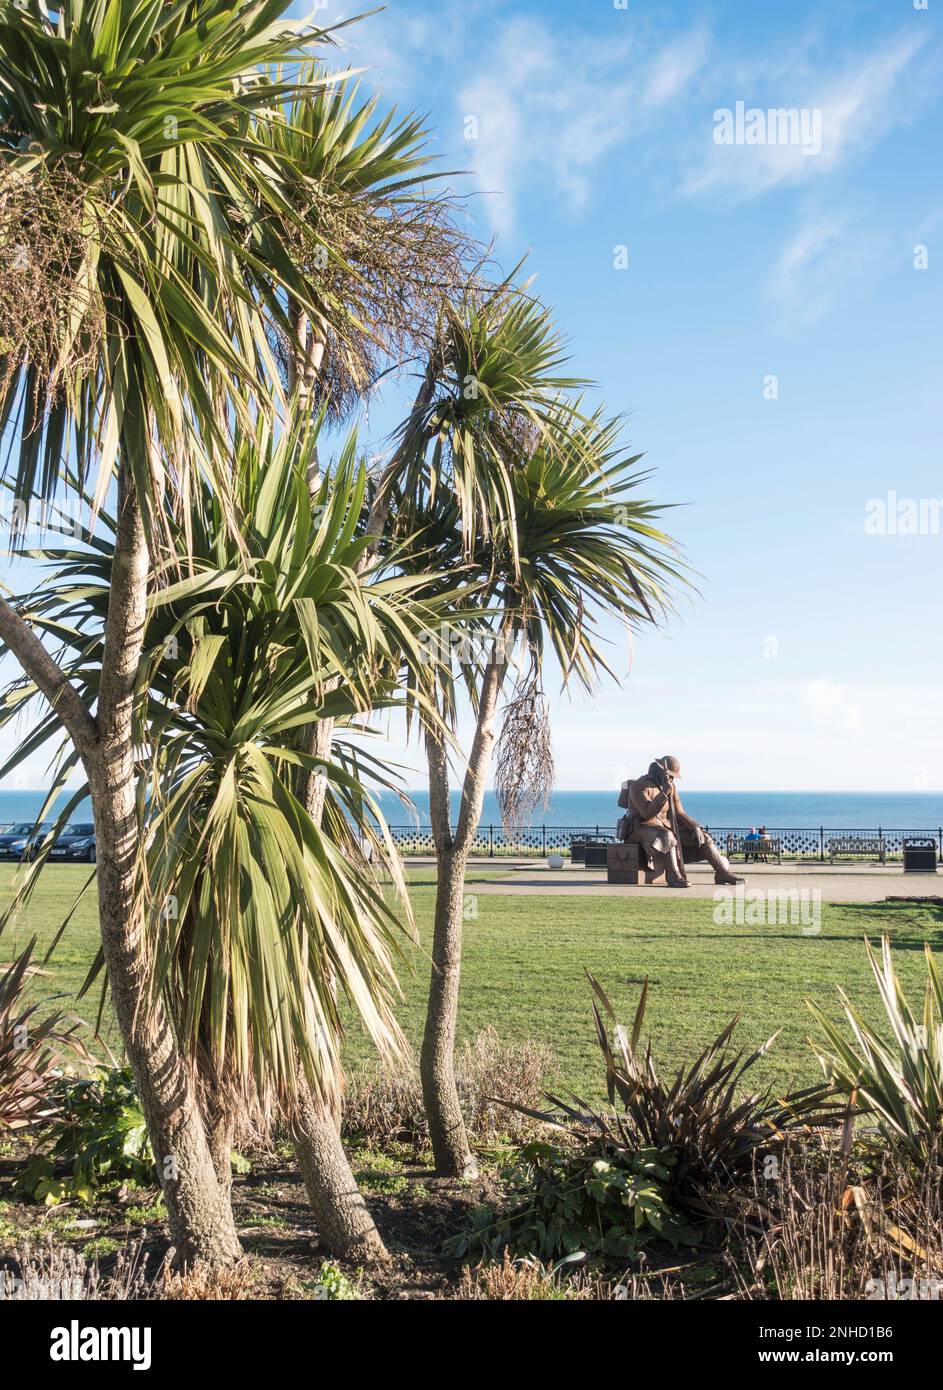 Palm trees and Tommy statue on Seaham seafront, in Co. Durham, England, UK Stock Photo